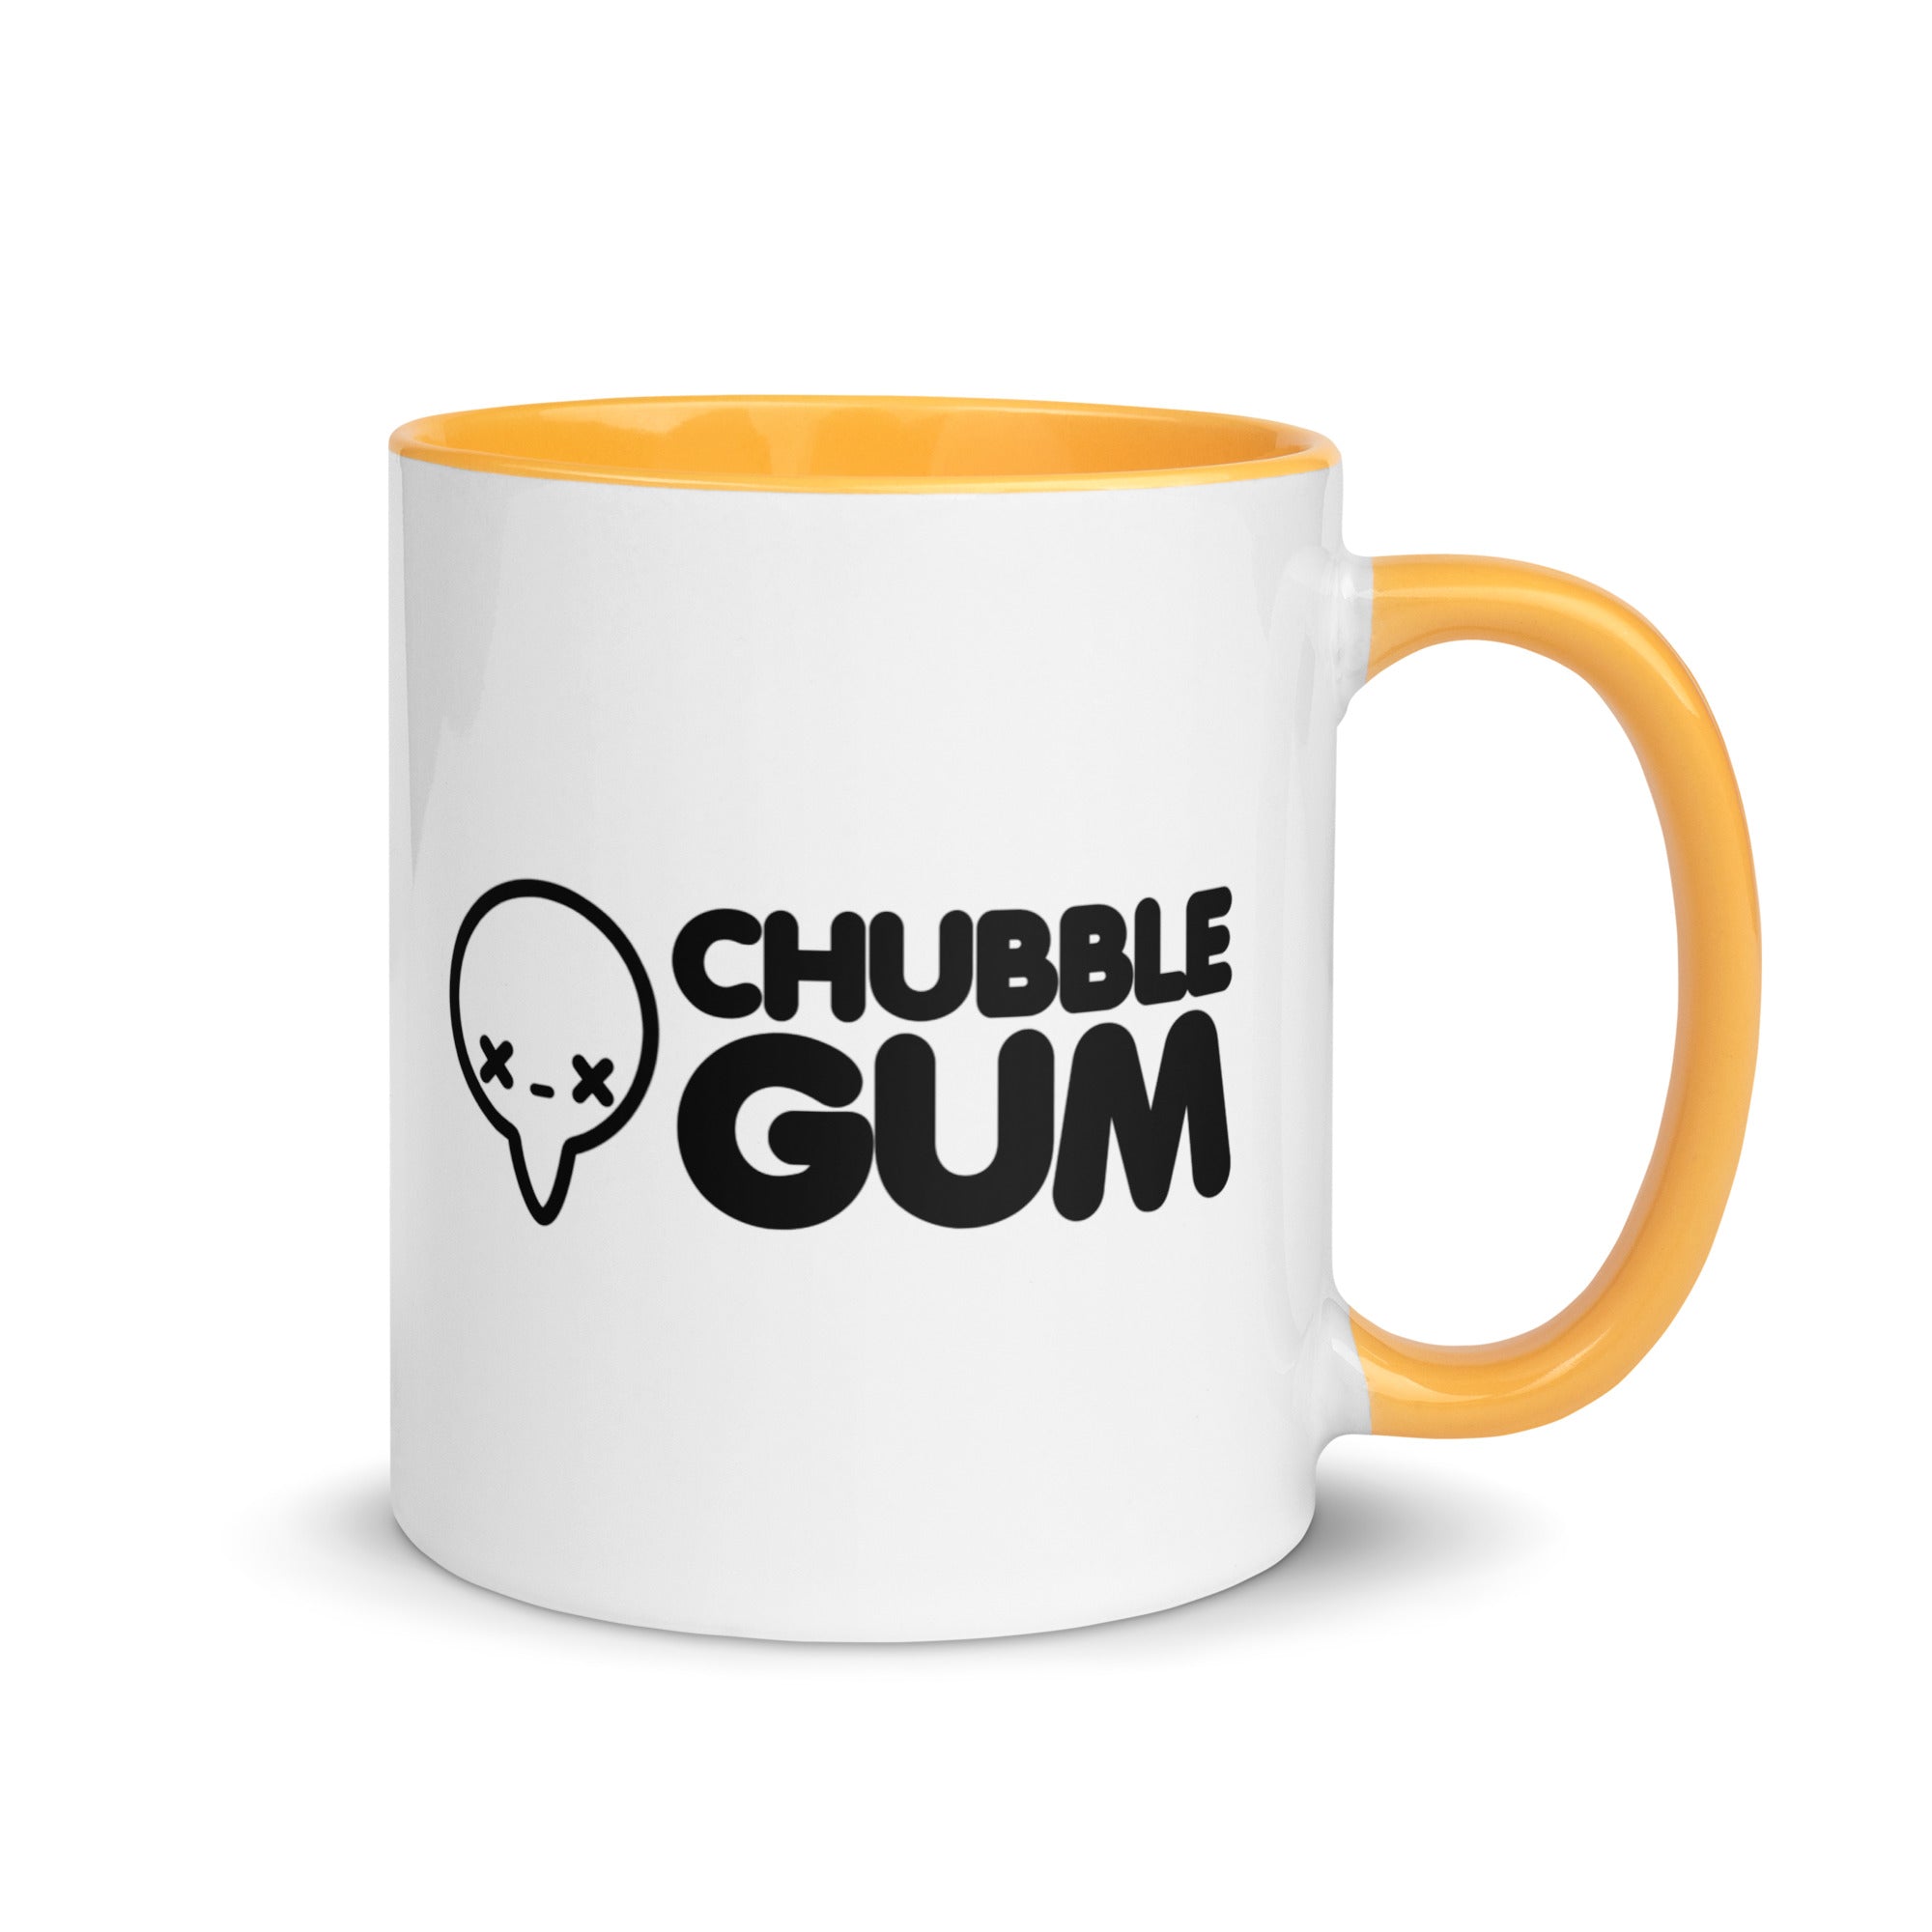 I WANNA BE WHERE THE PEOPLE ARENT - Mug With Color Inside - ChubbleGumLLC